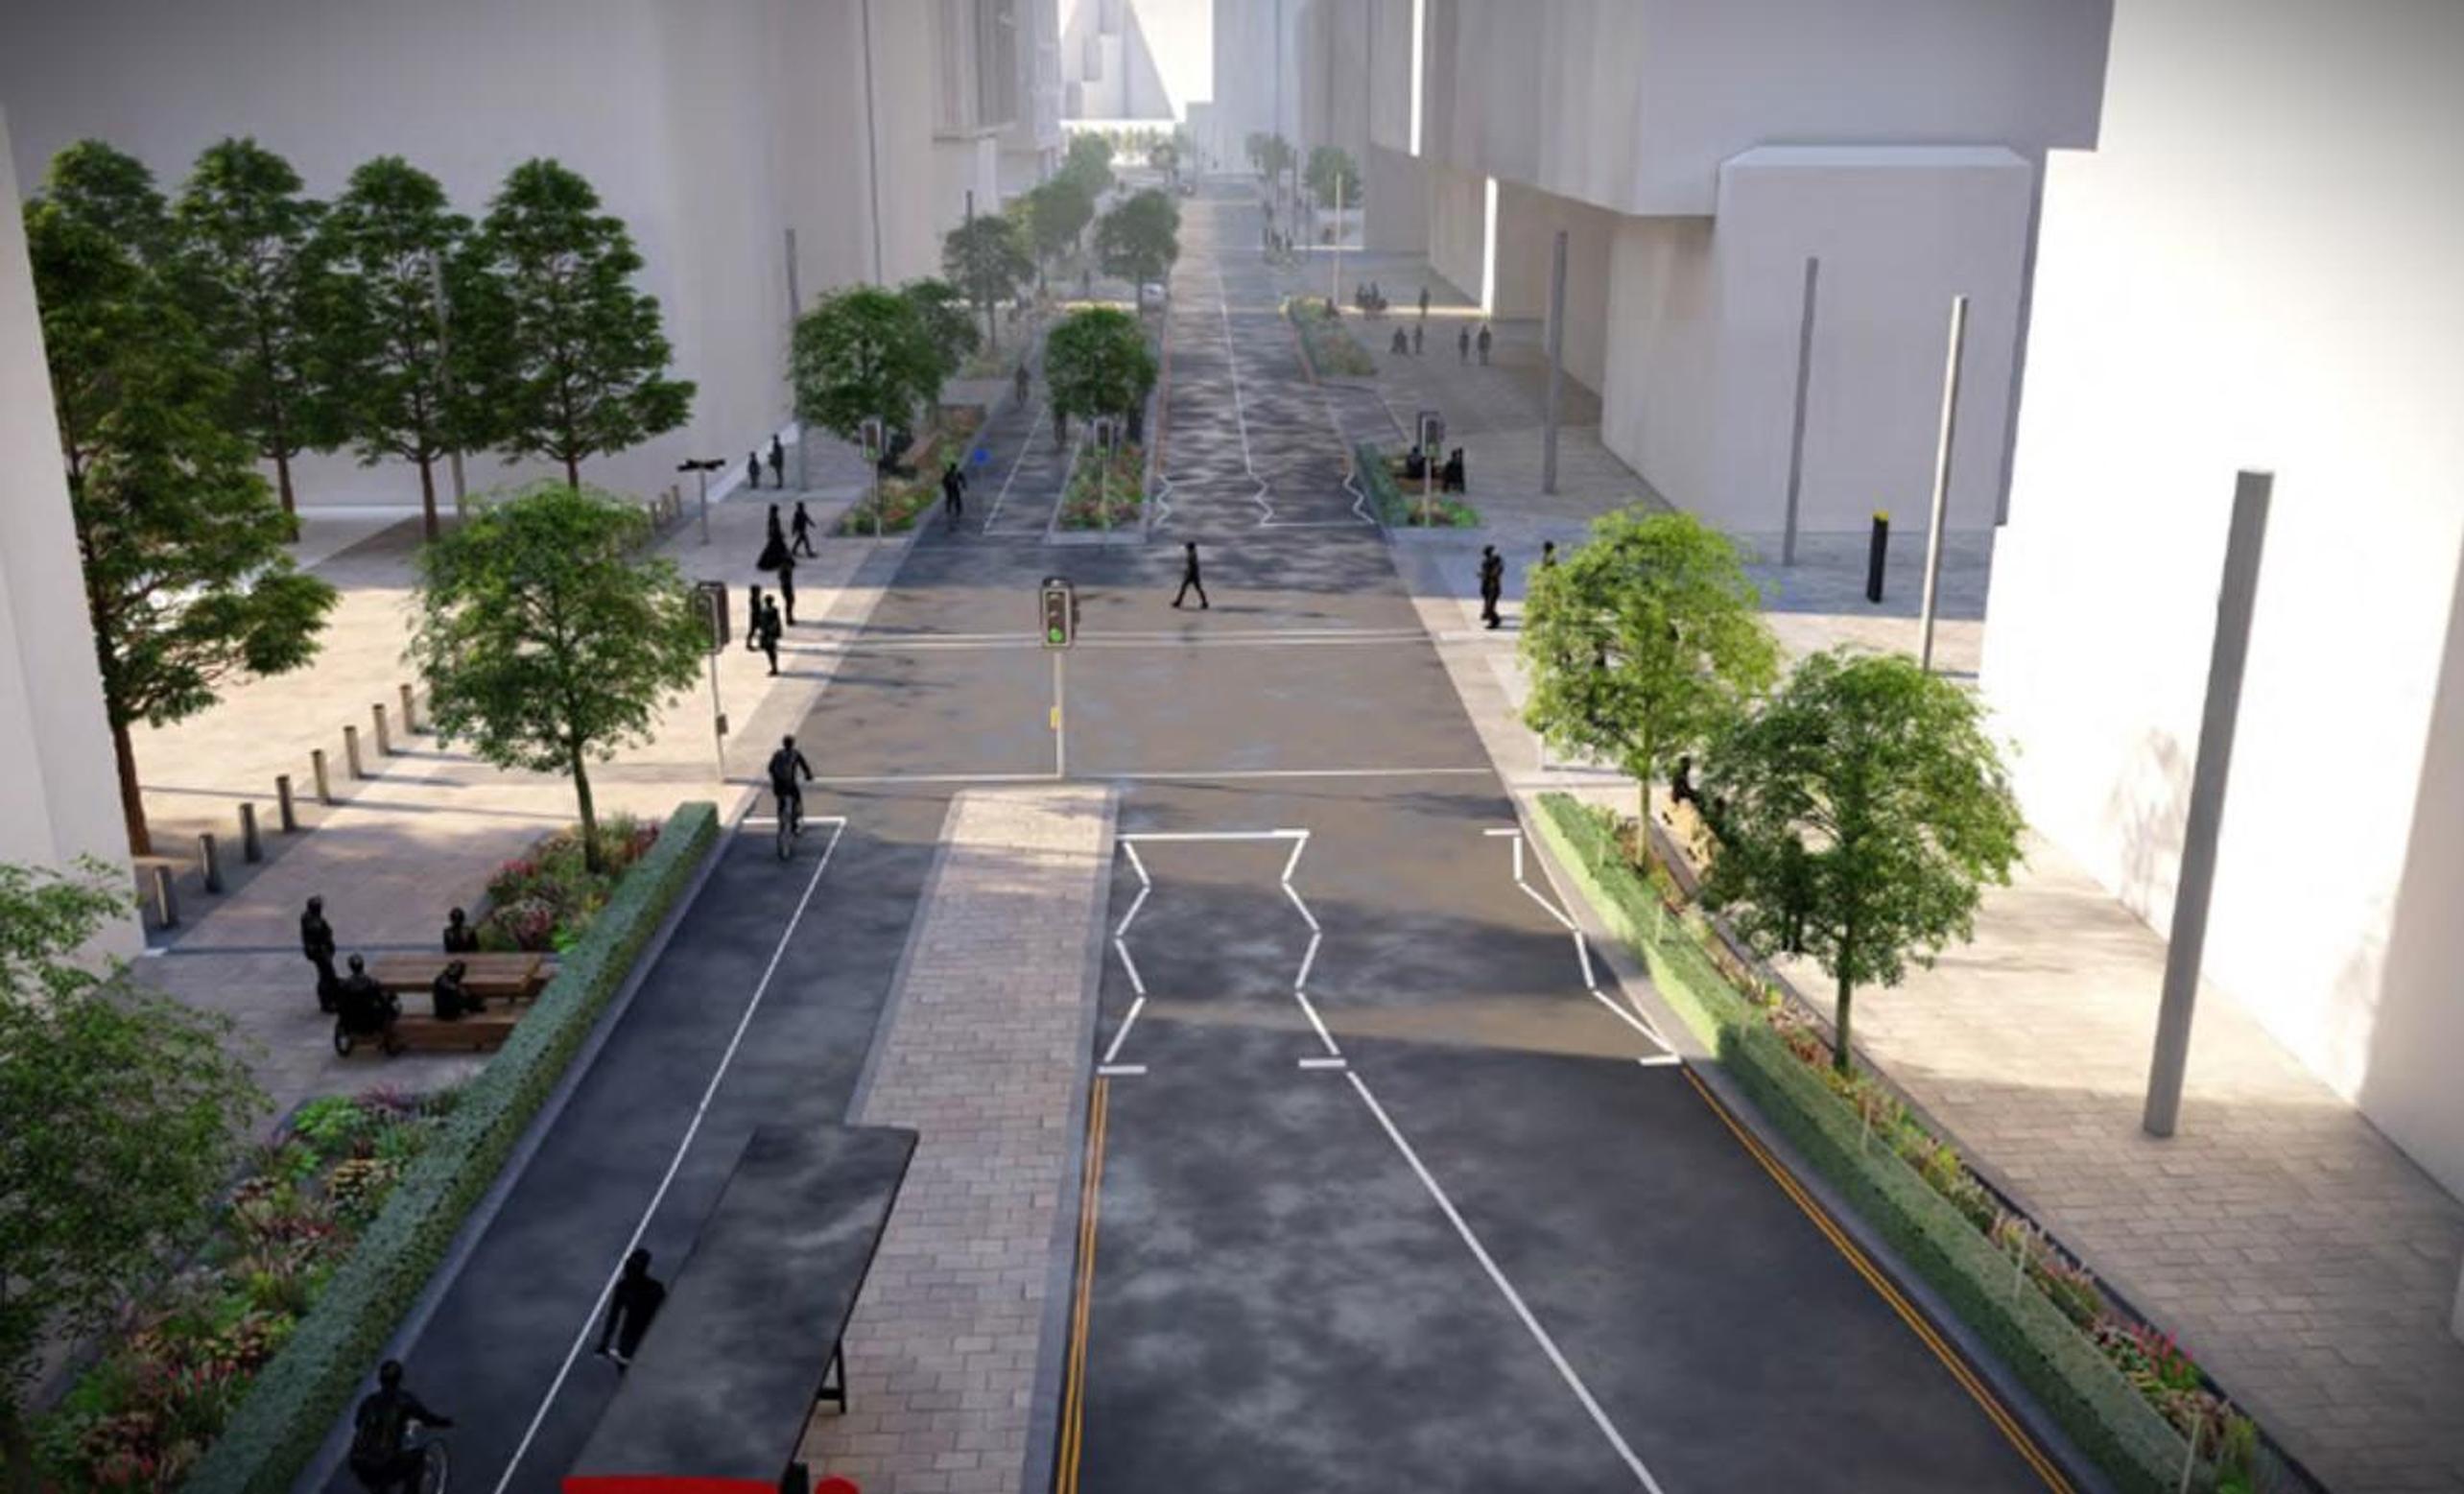 The Westfield Avenue Public Realm Improvement scheme will feature wider pavements, a segregated cycle track, extra cycle stands, improvements to crossings, 60 new trees and 31 rain gardens